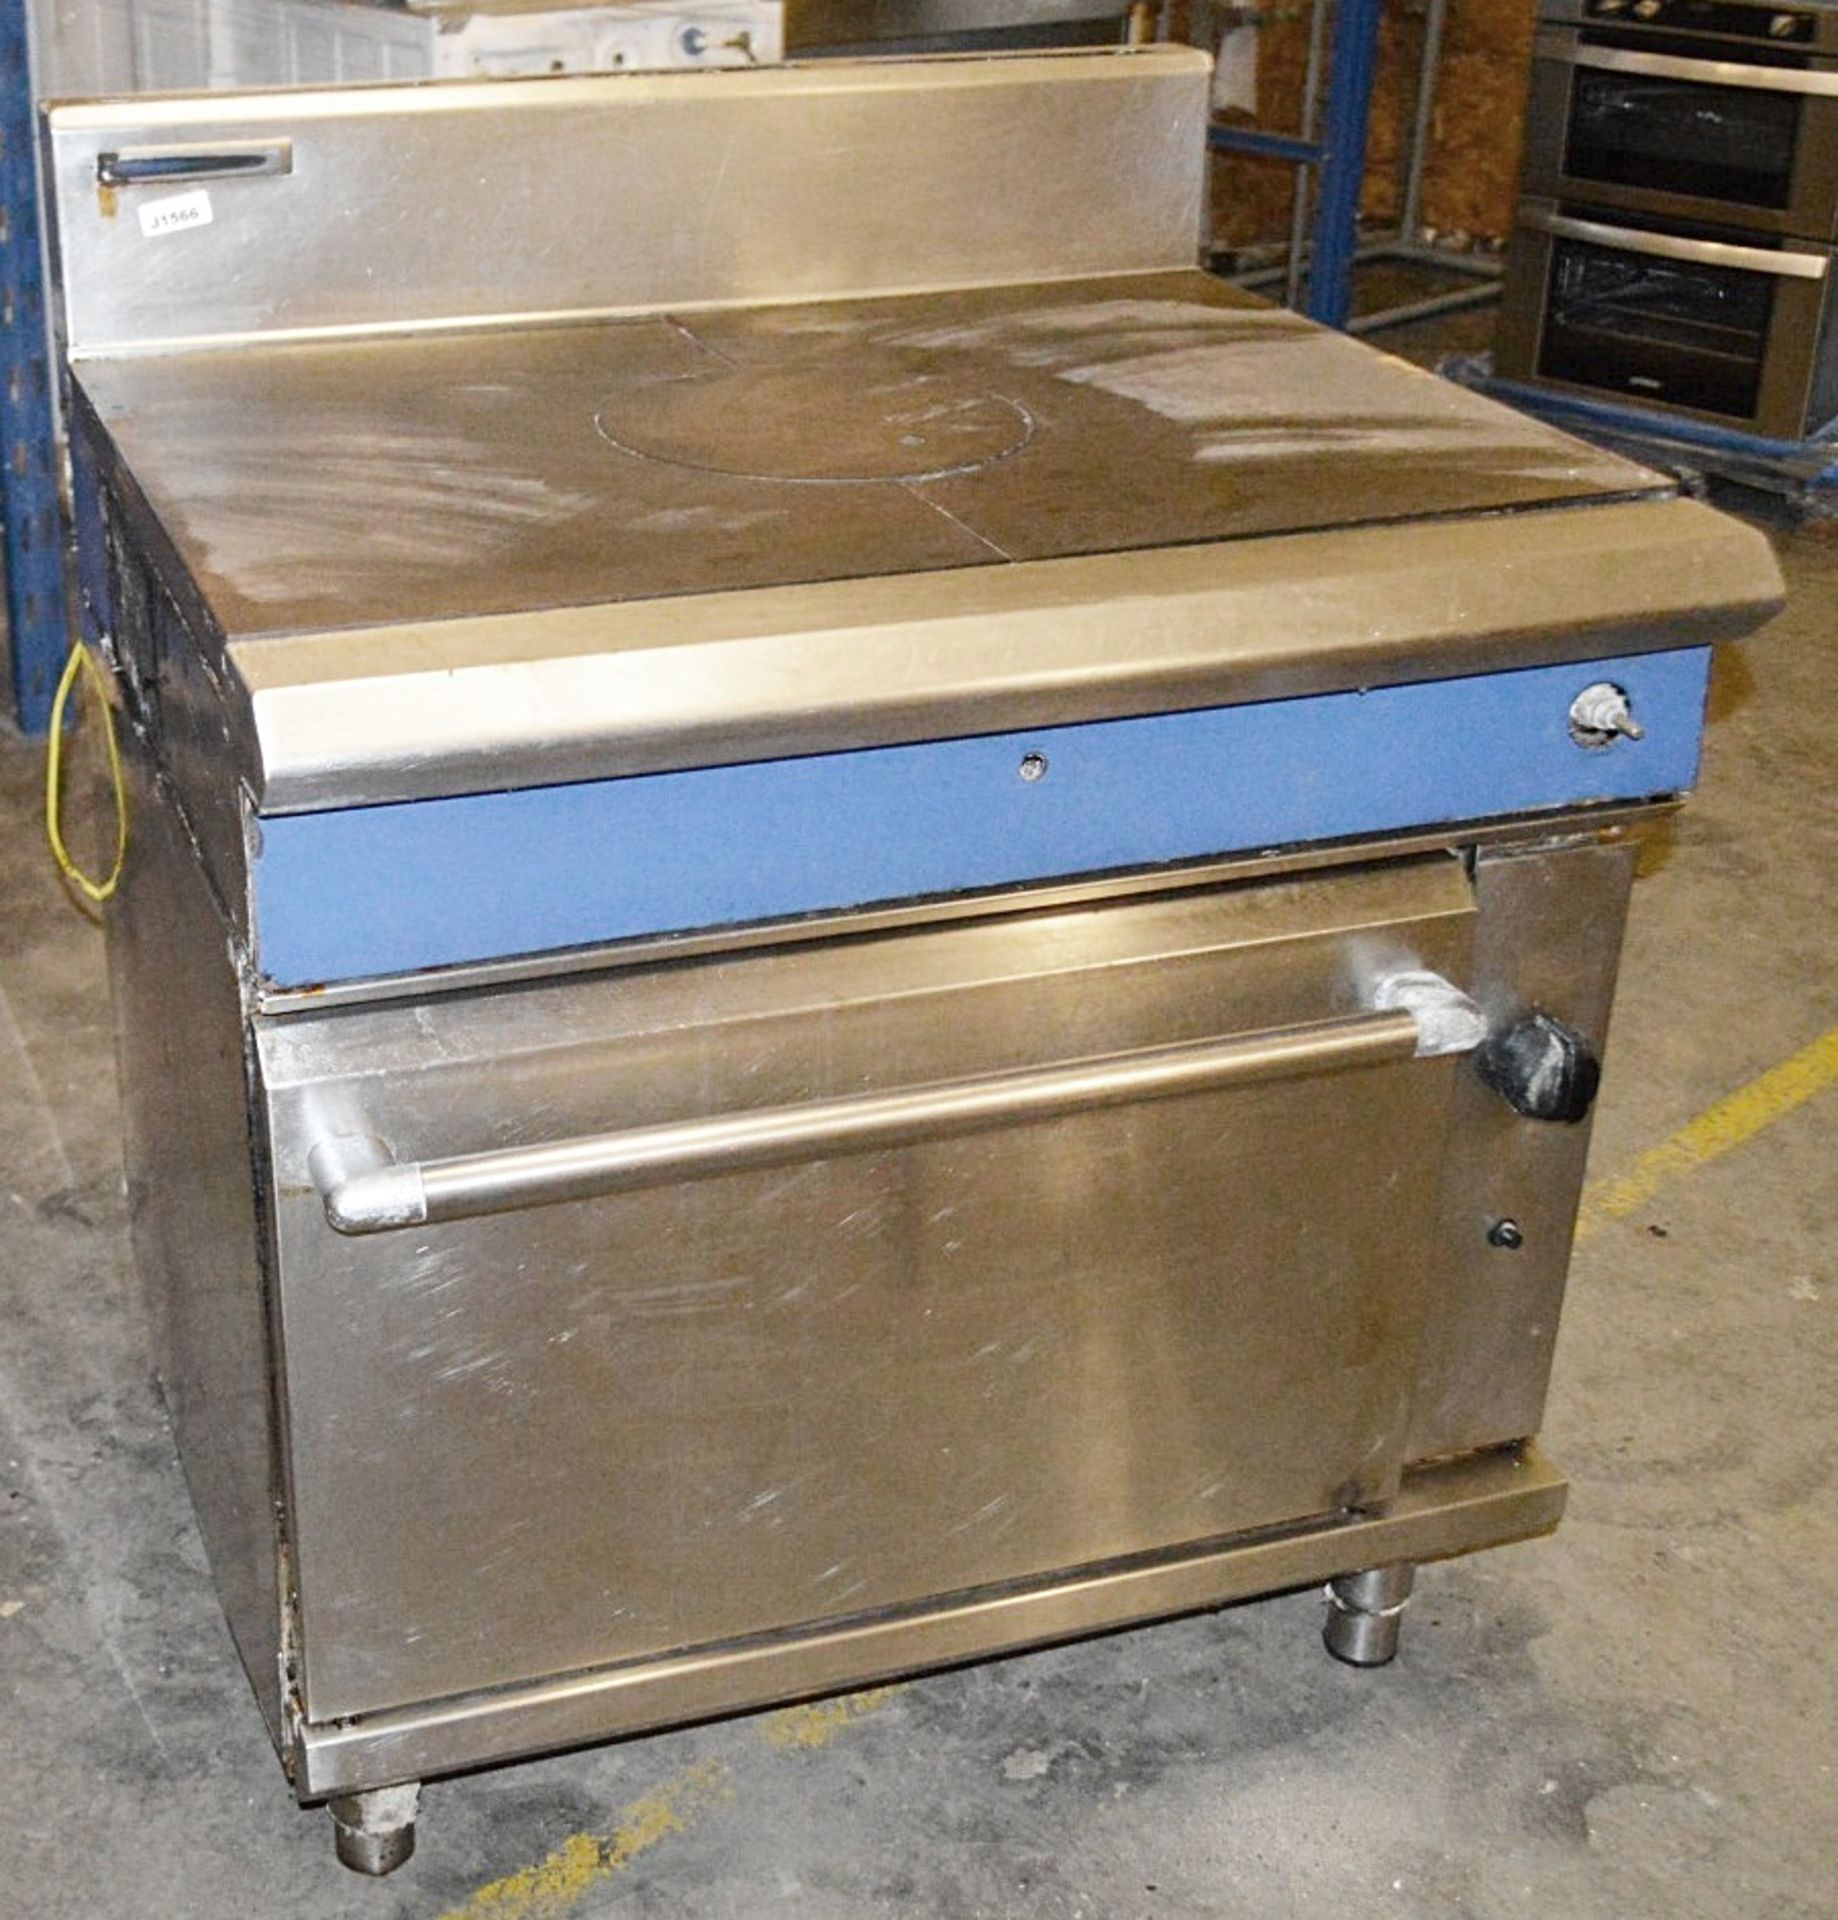 1 x Commercial Natural Gas Solid Top Range In Stainless Steel - Ref: J1566 - Low Start, No Reserve - Image 2 of 5